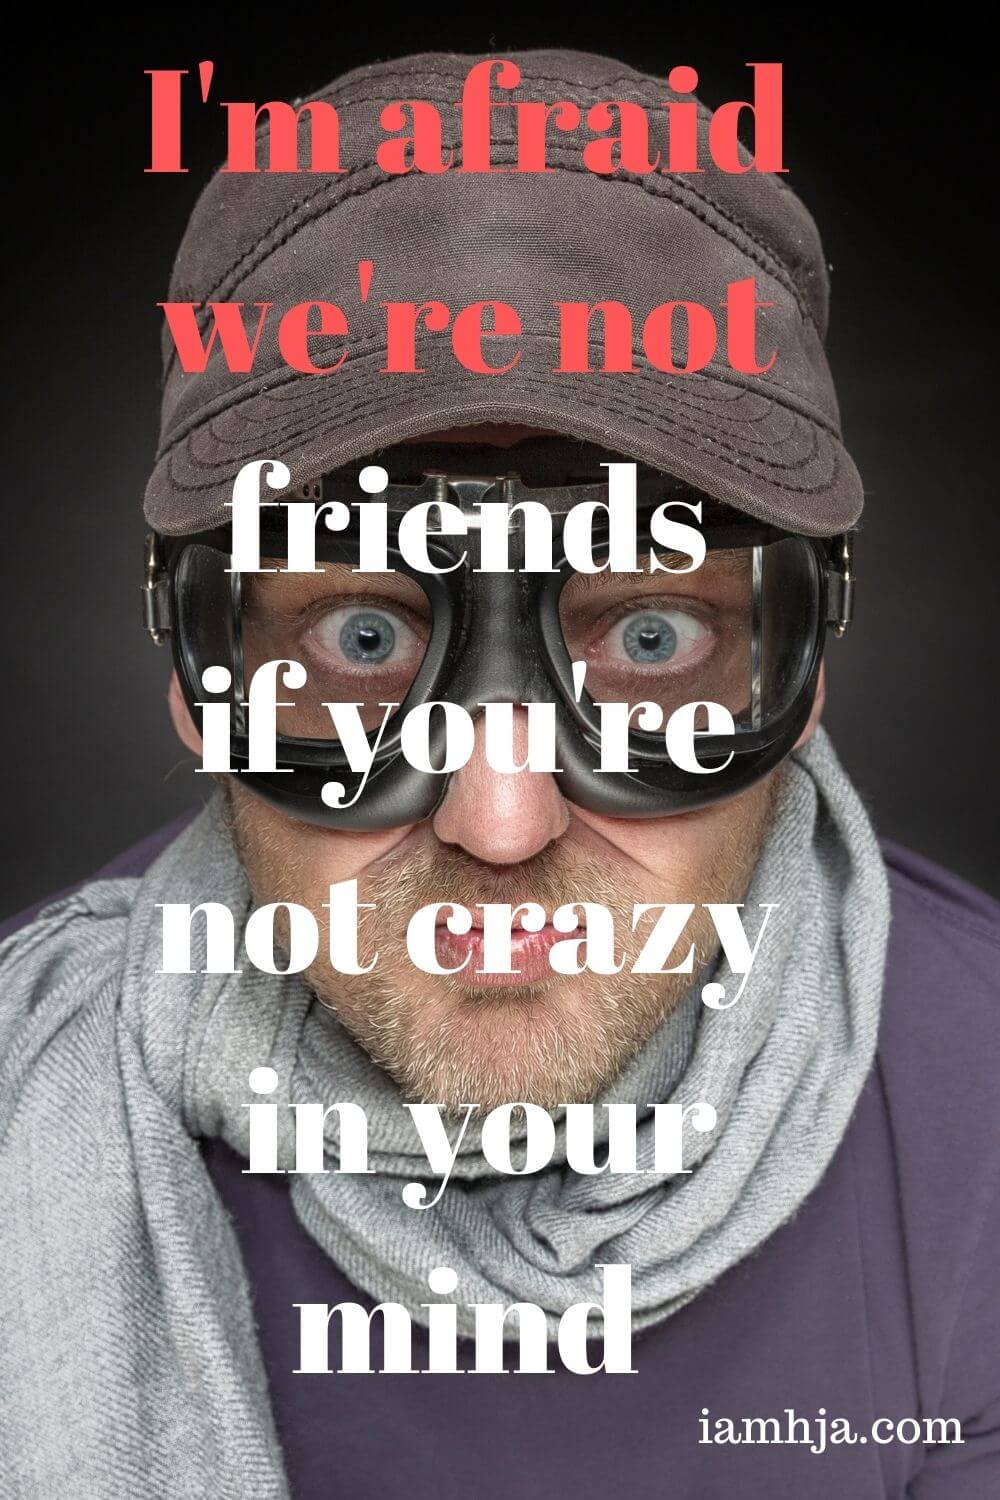 I'm afraid we're not friends if you're not crazy in your mind